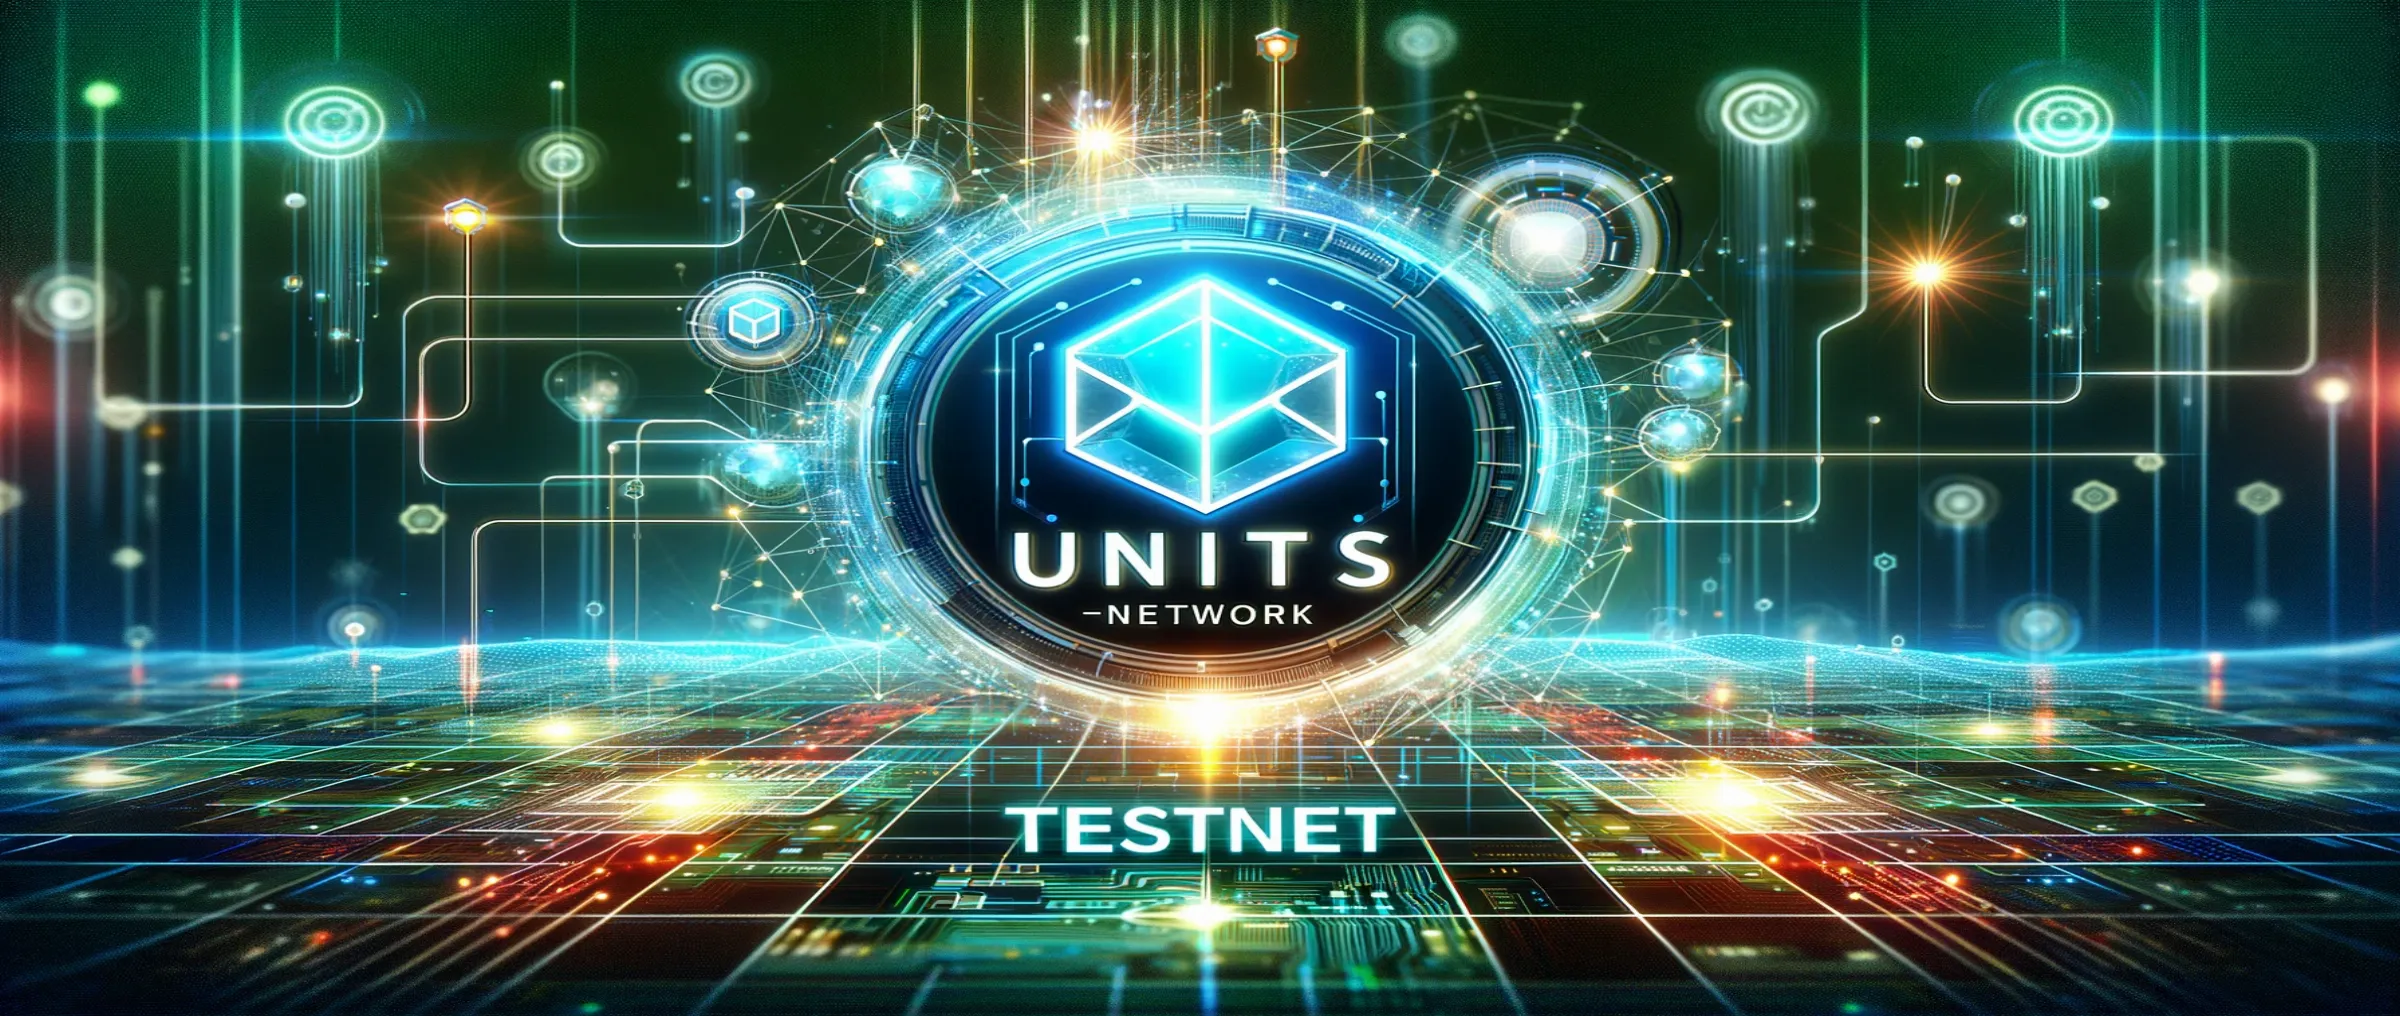 The Waves team has launched the Units.Network testnet